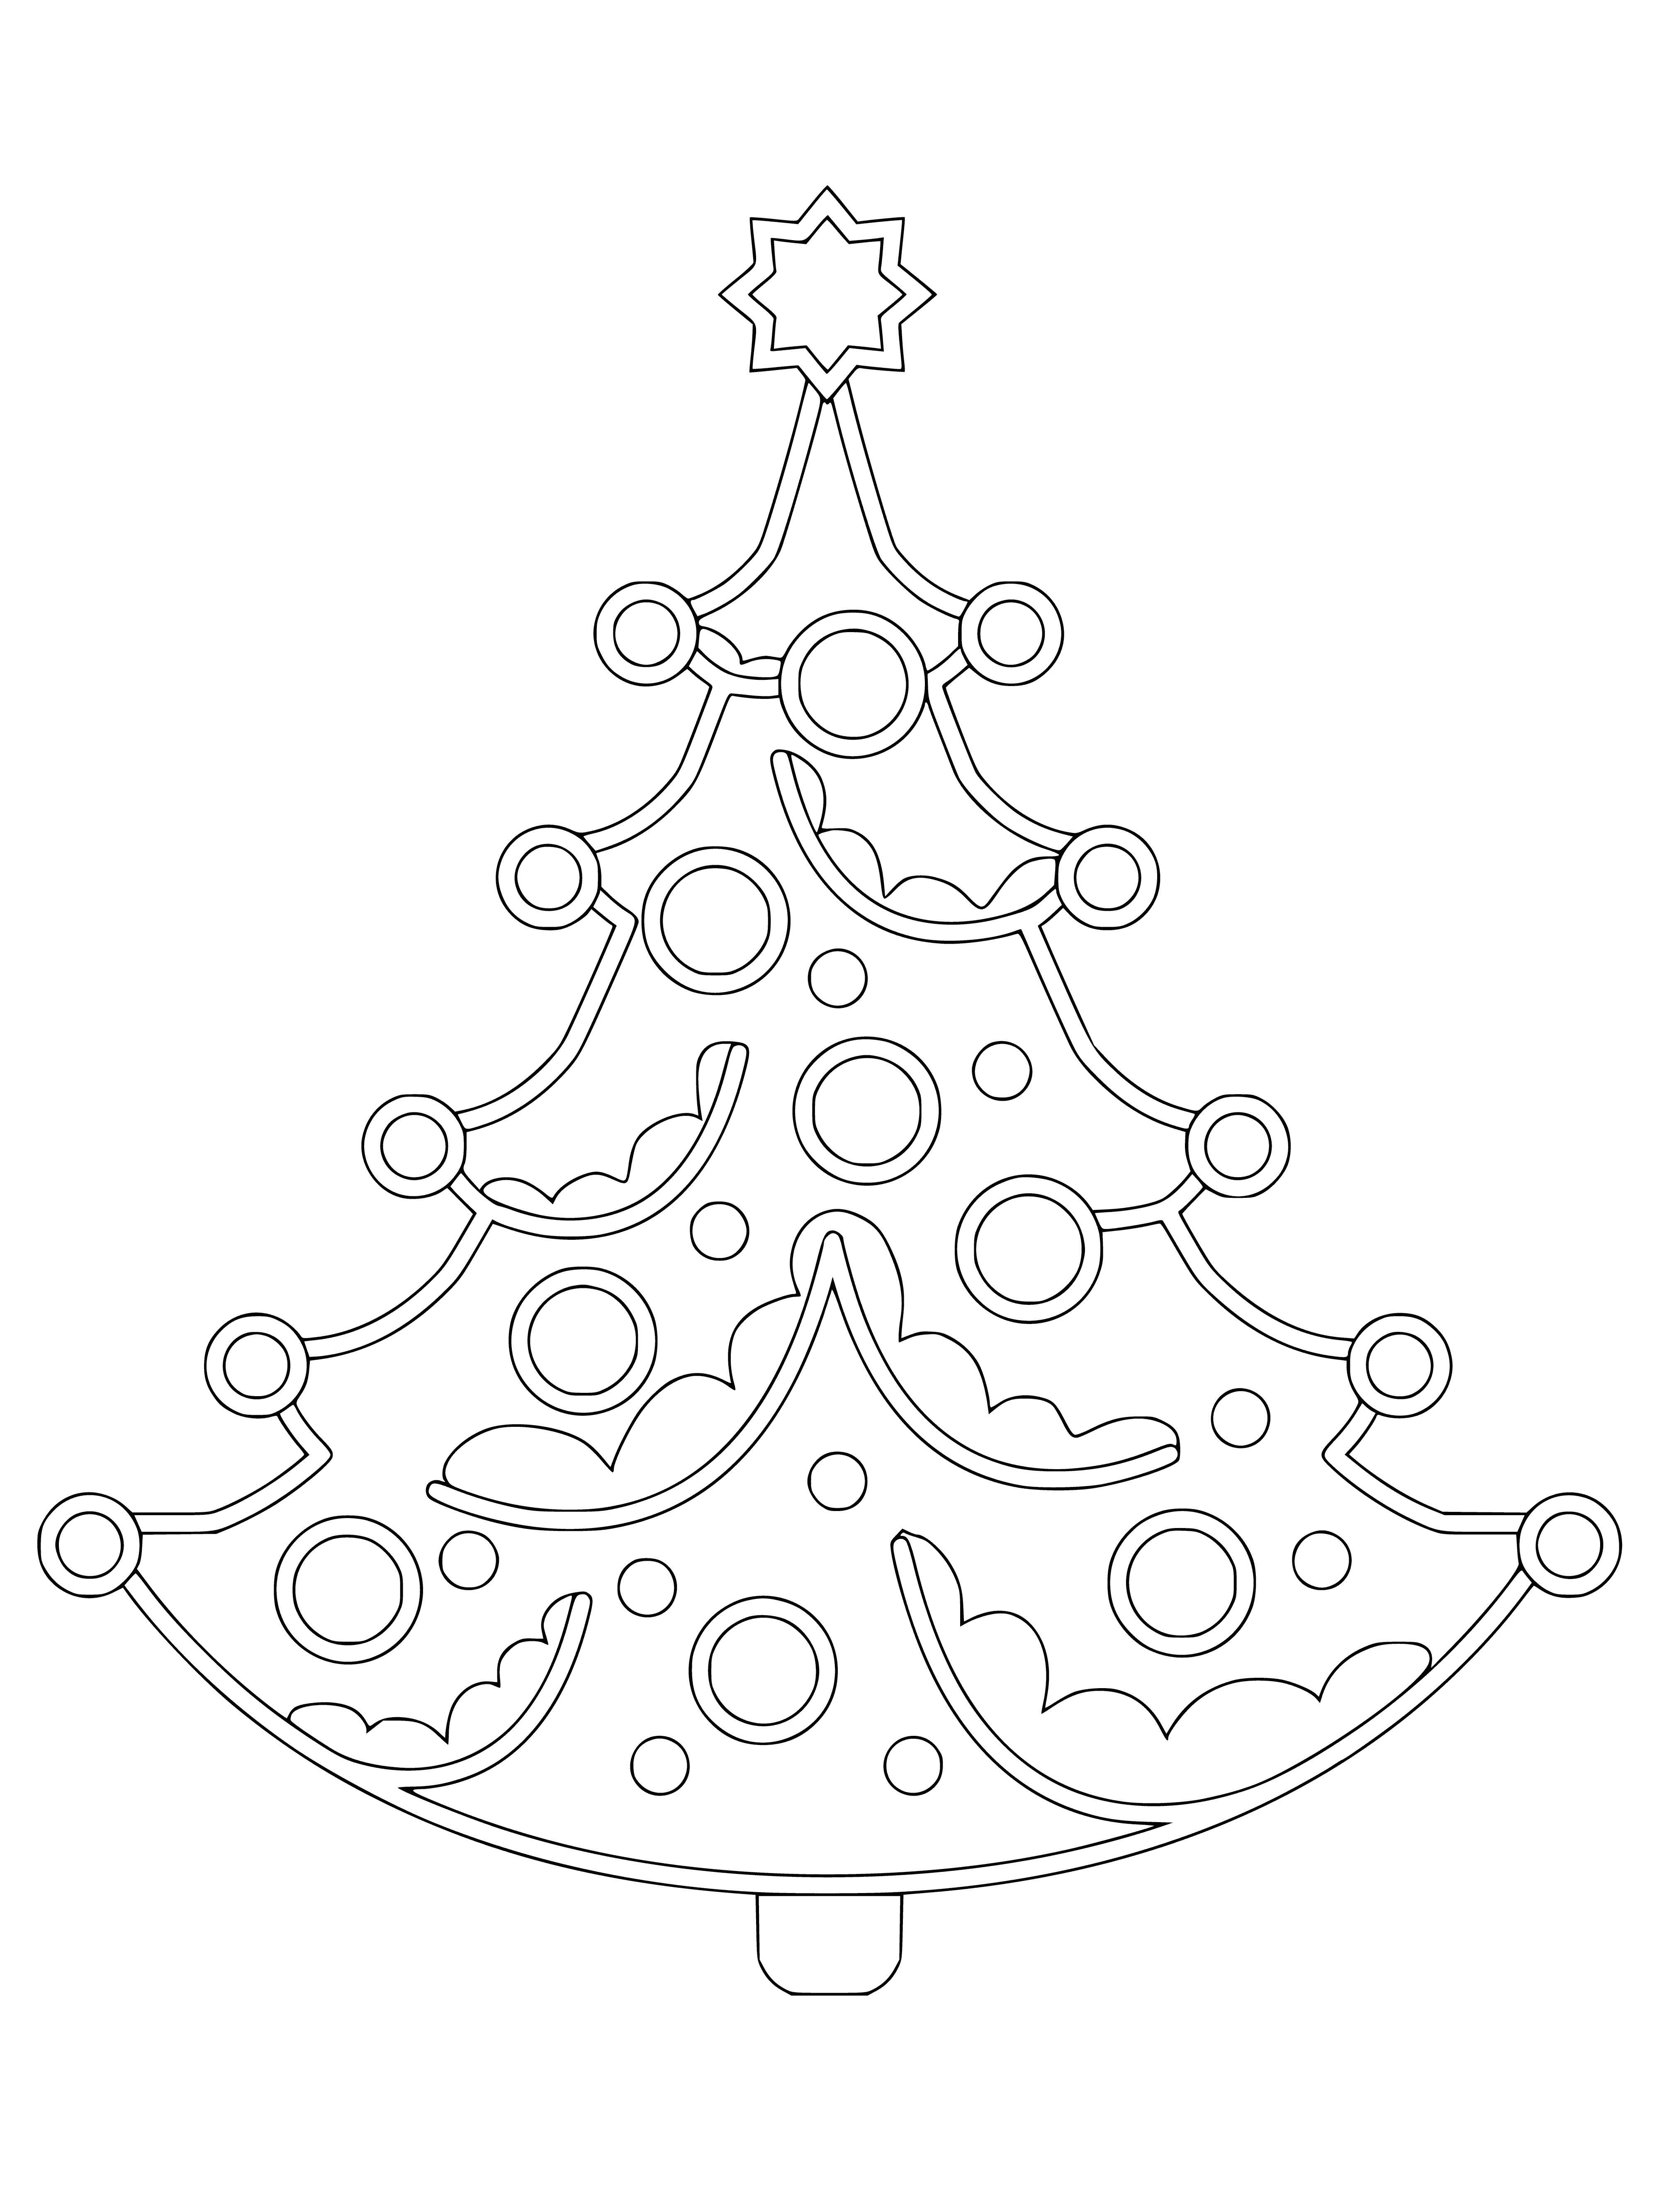 coloring page: Family of four gathered around a giant, decorated Christmas tree in snowy landscape, smiling and celebrating. #ChristmasCheer